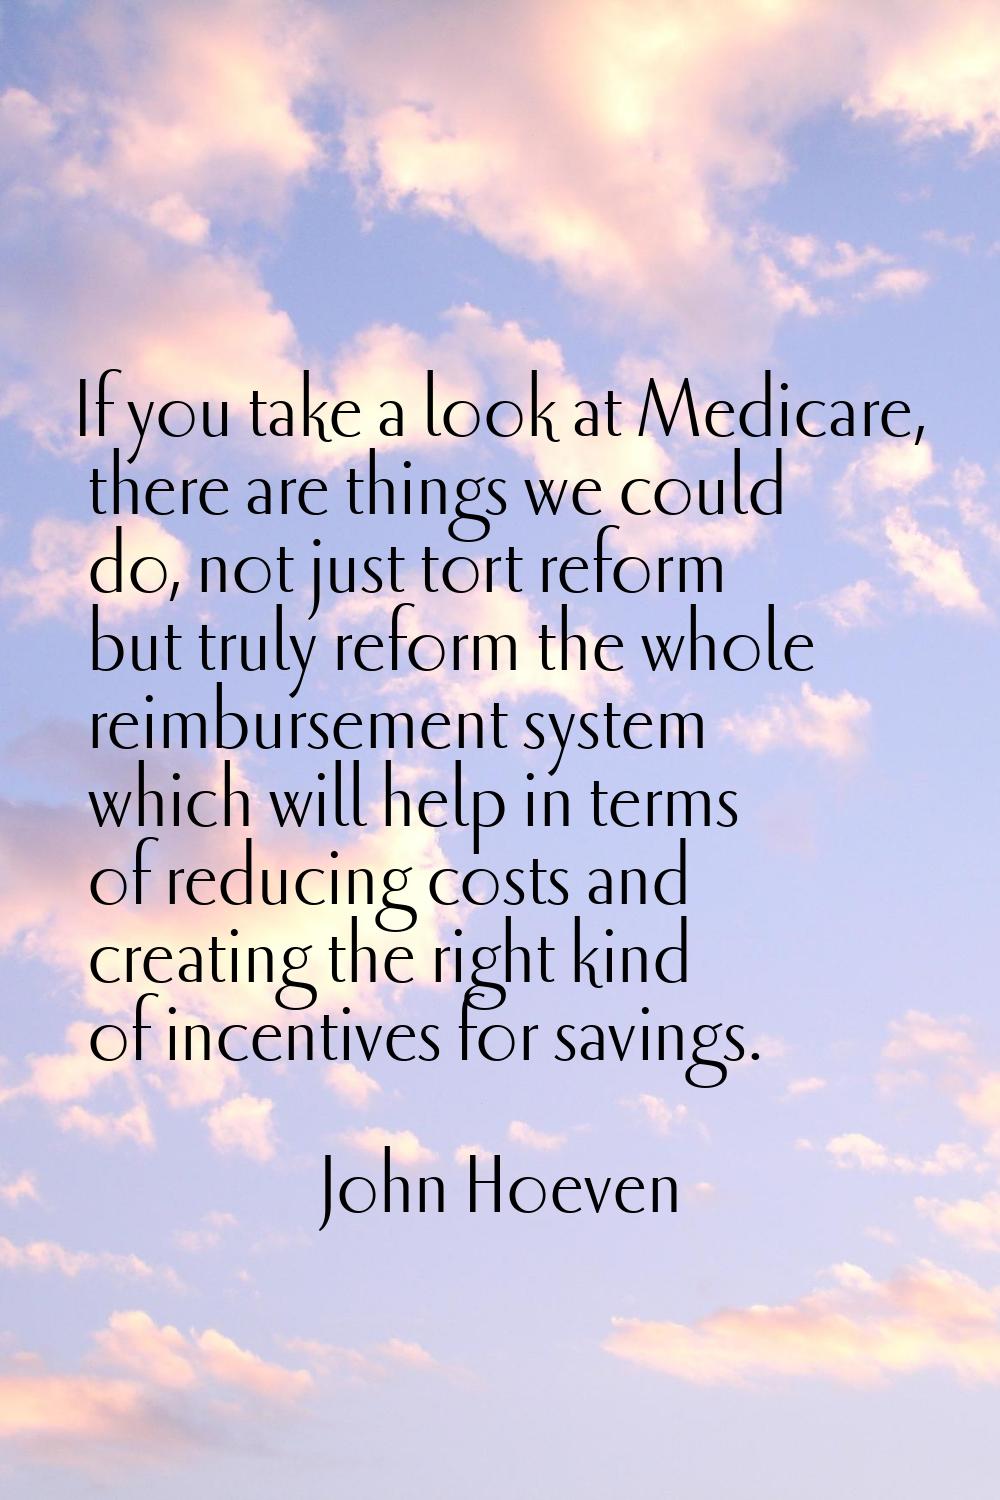 If you take a look at Medicare, there are things we could do, not just tort reform but truly reform